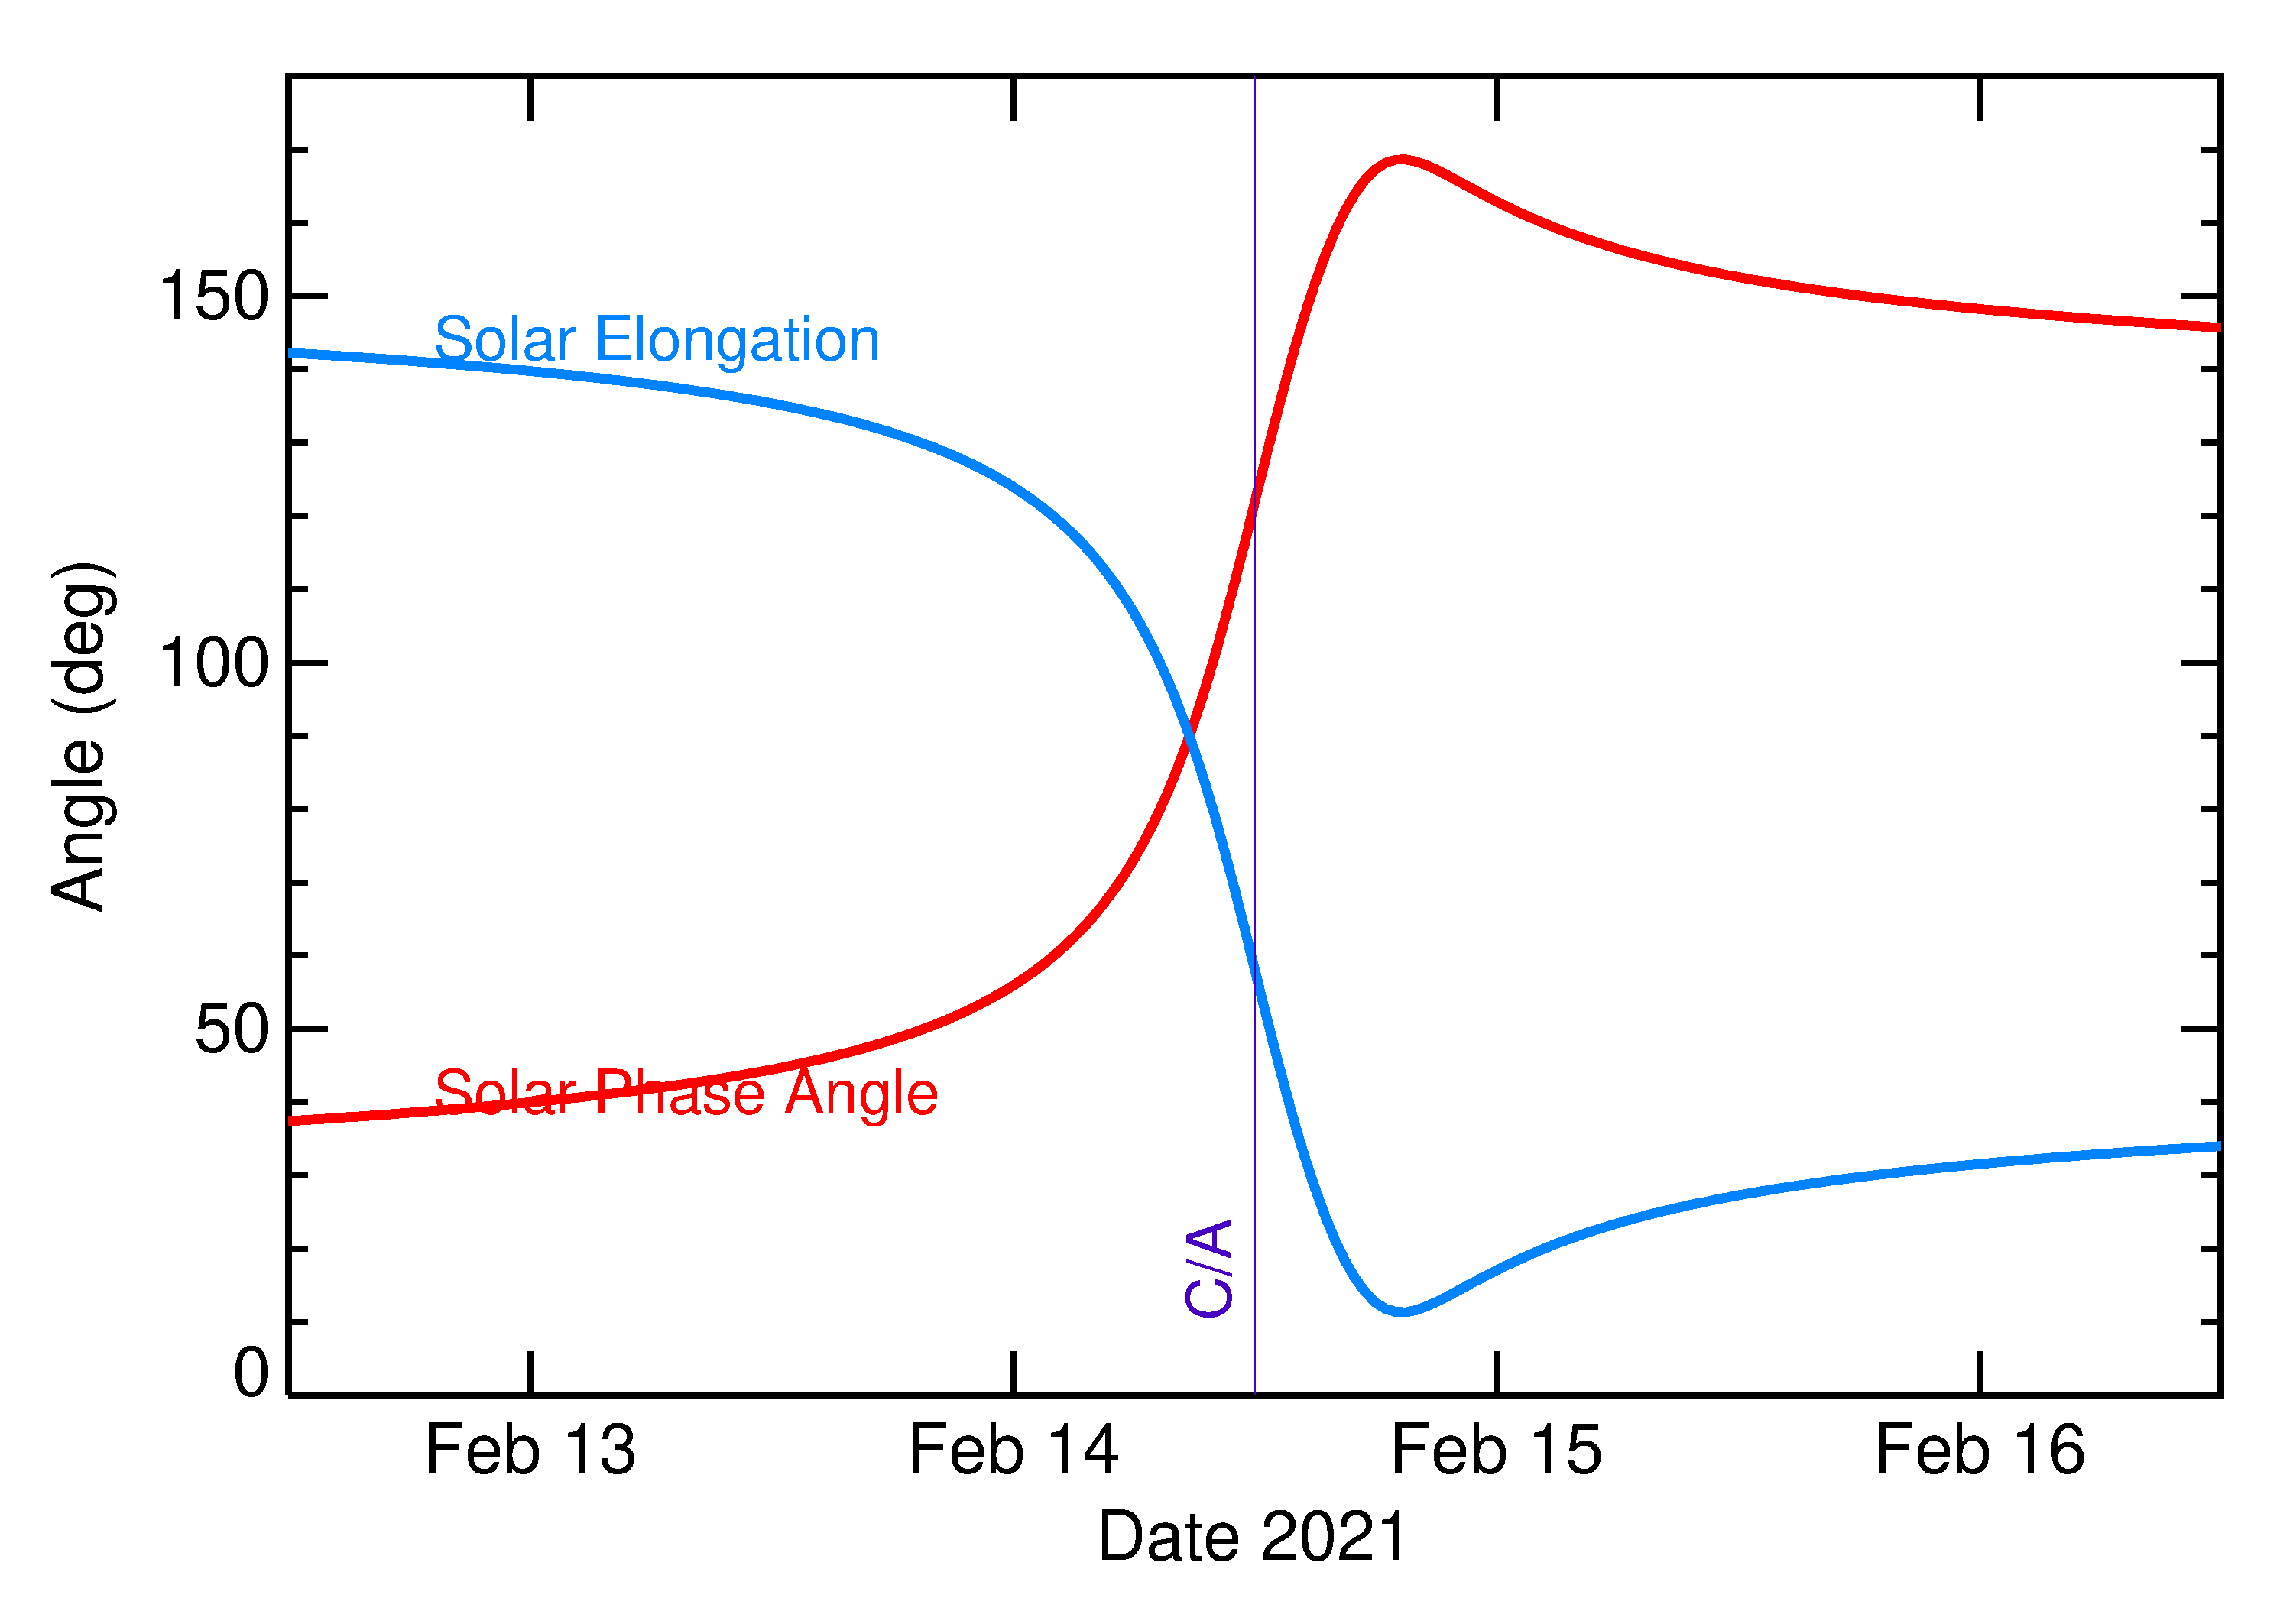 Solar Elongation and Solar Phase Angle of 2021 CS6 in the days around closest approach